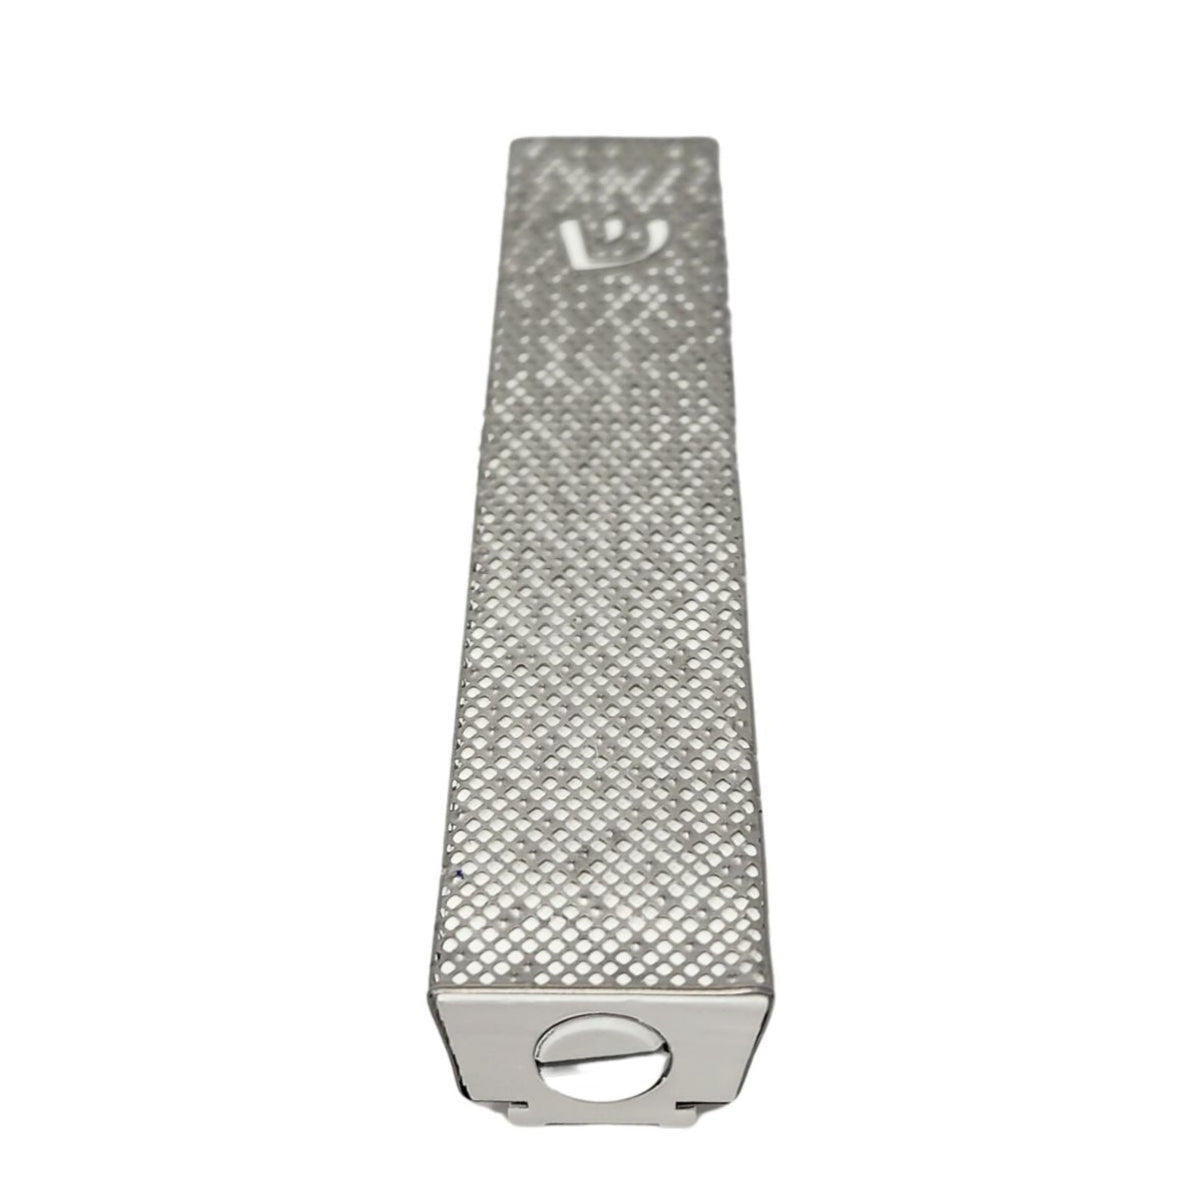 Mezuzah with Hebrew writing. Silver and white color.